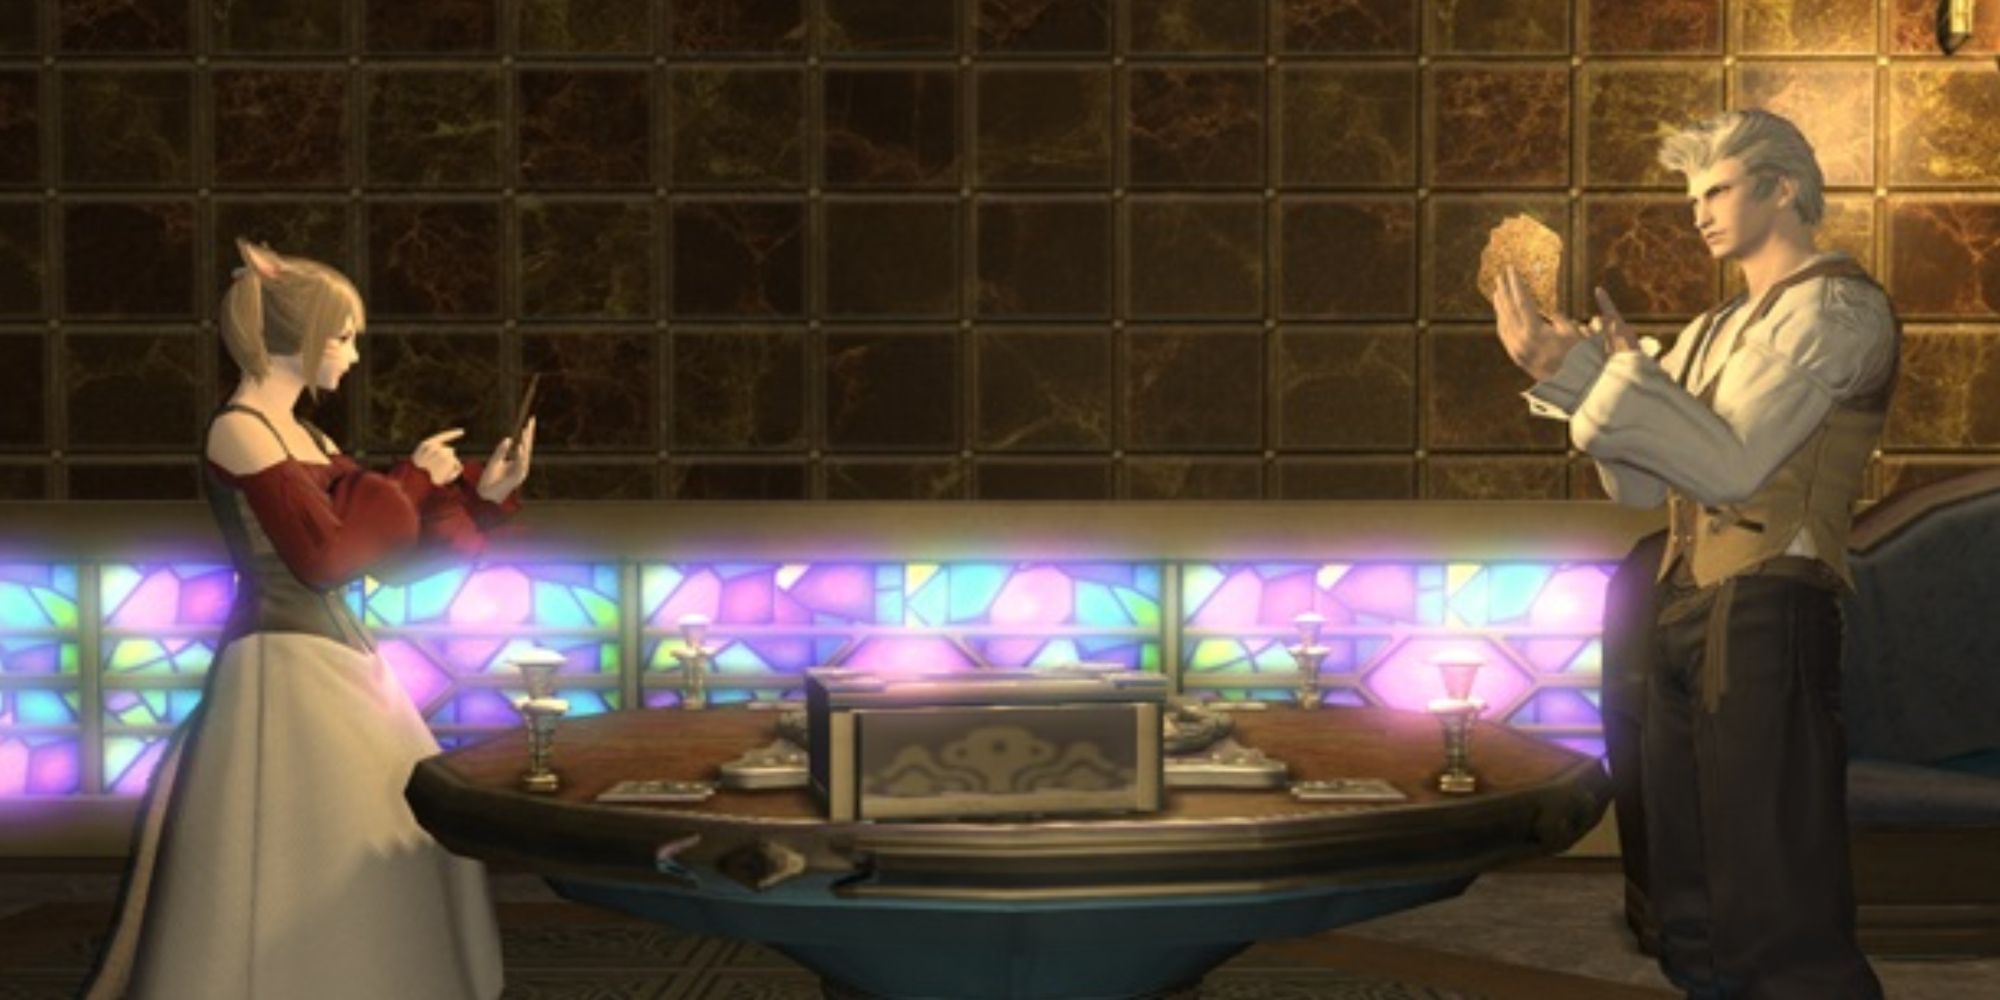 Two people face off in a Triple Triad card game match from Final Fantasy 14